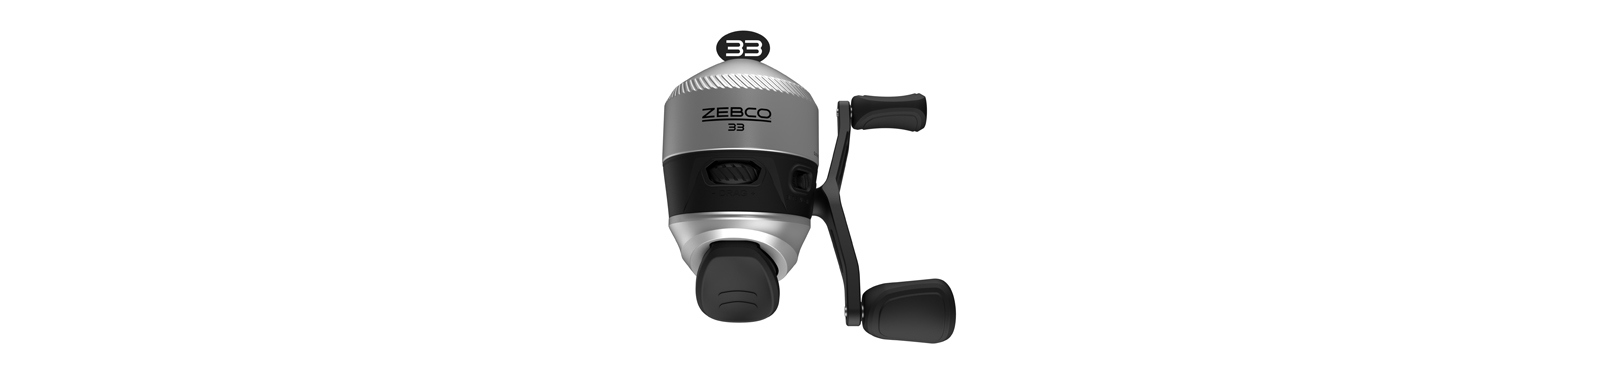 Zebco 33 Max Spincast Fishing Reel, Size 60 Reel, Built-in Bite Alert,  Lightweight Graphite Frame, 2:6:1 Gear Ratio, Pre-spooled with 20-Pound  Zebco Cajun Fishing Line, Silver/Black (2016) : Sports & Outdoors 